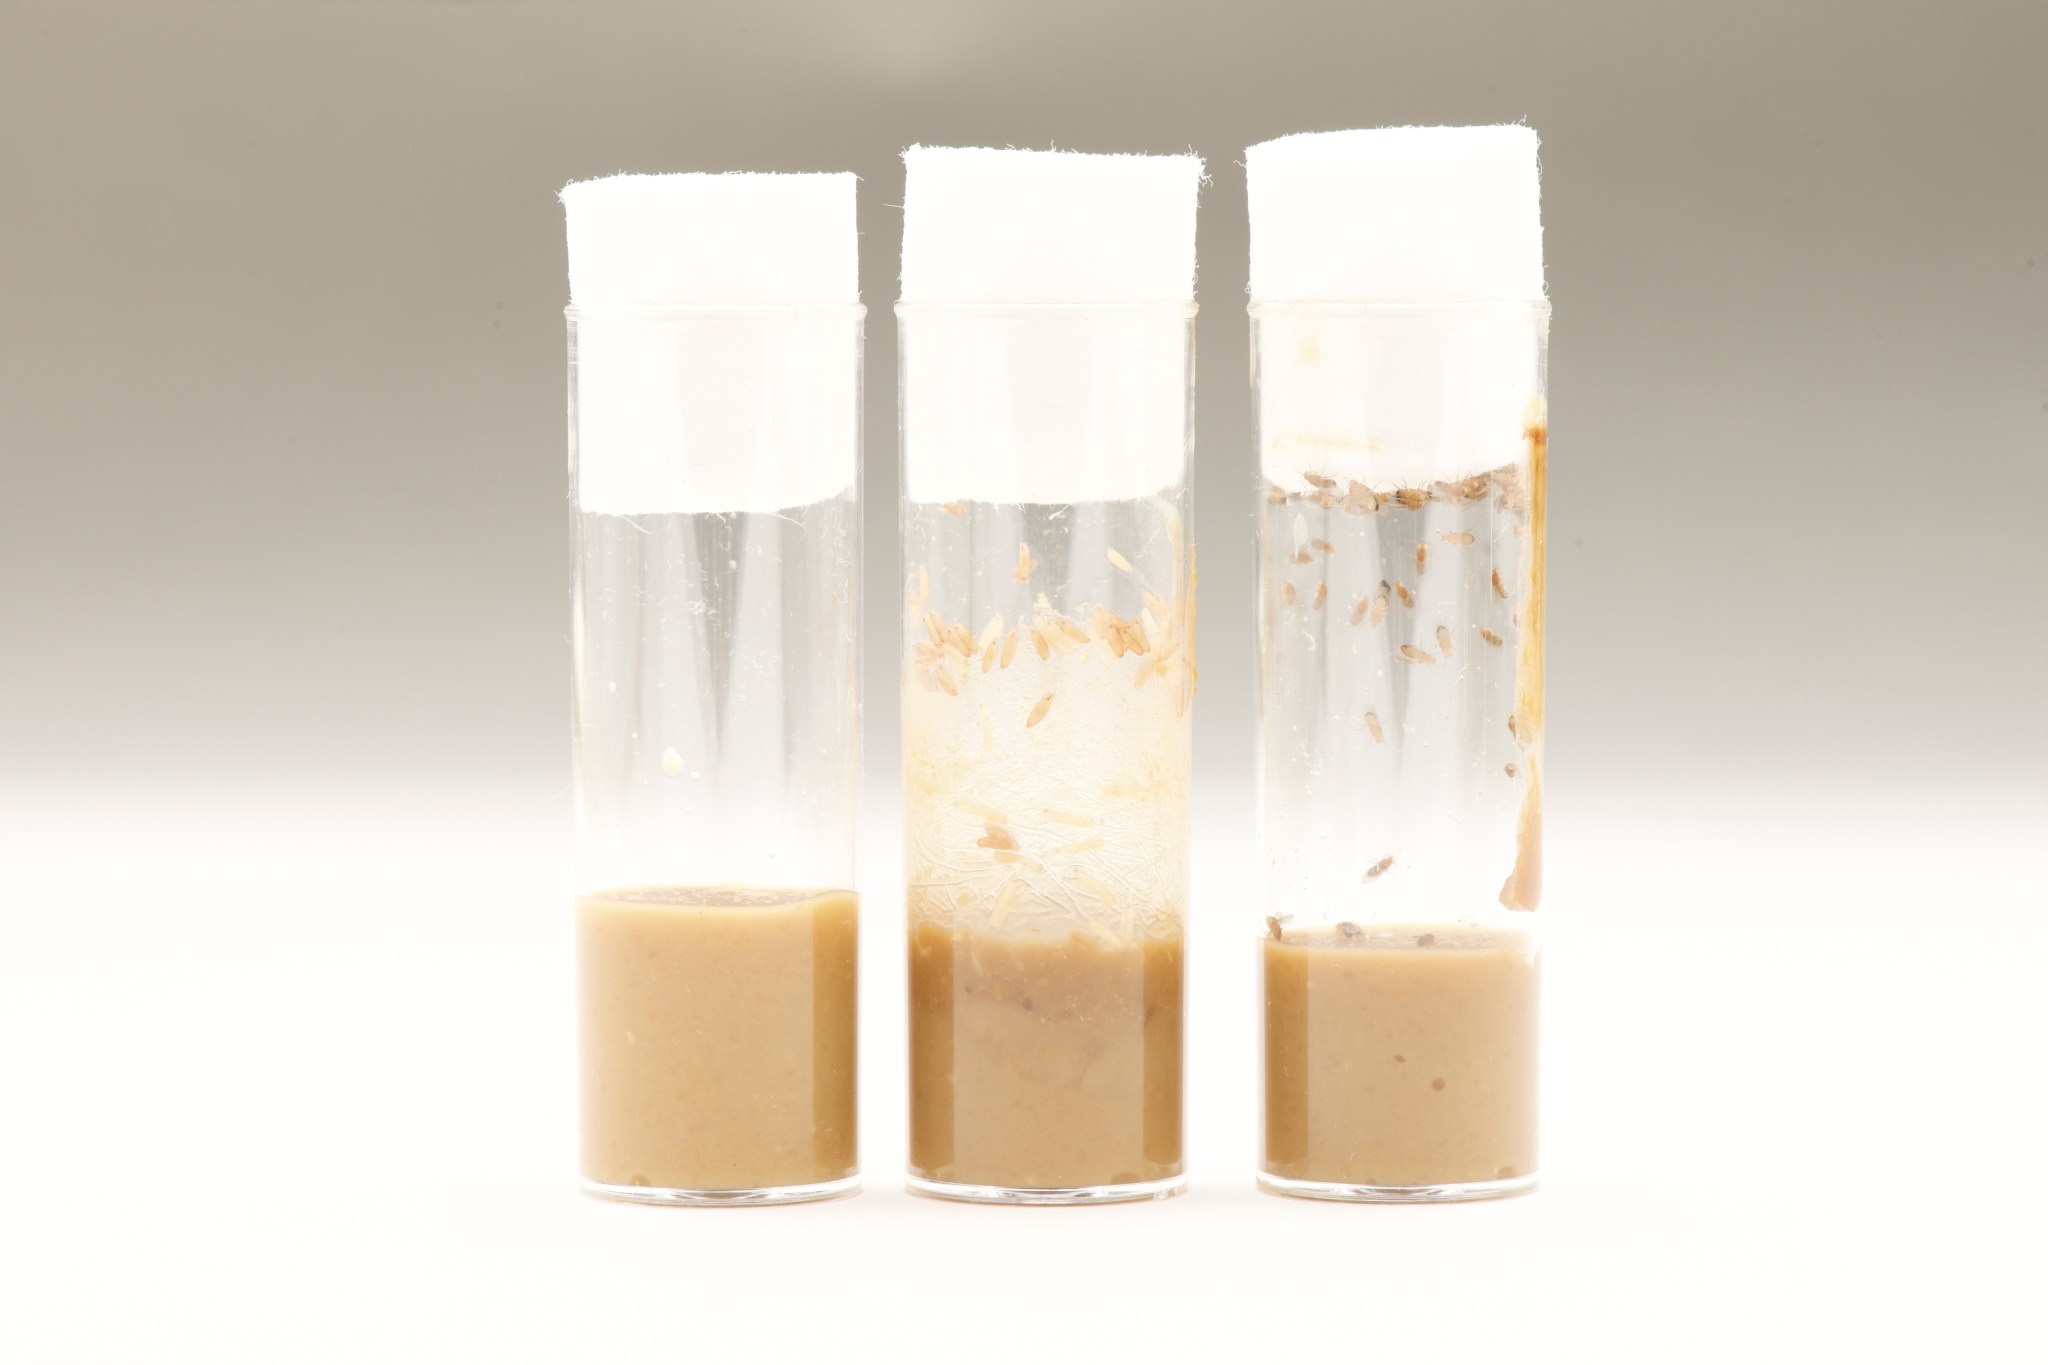 Fruit flies at three stages of development